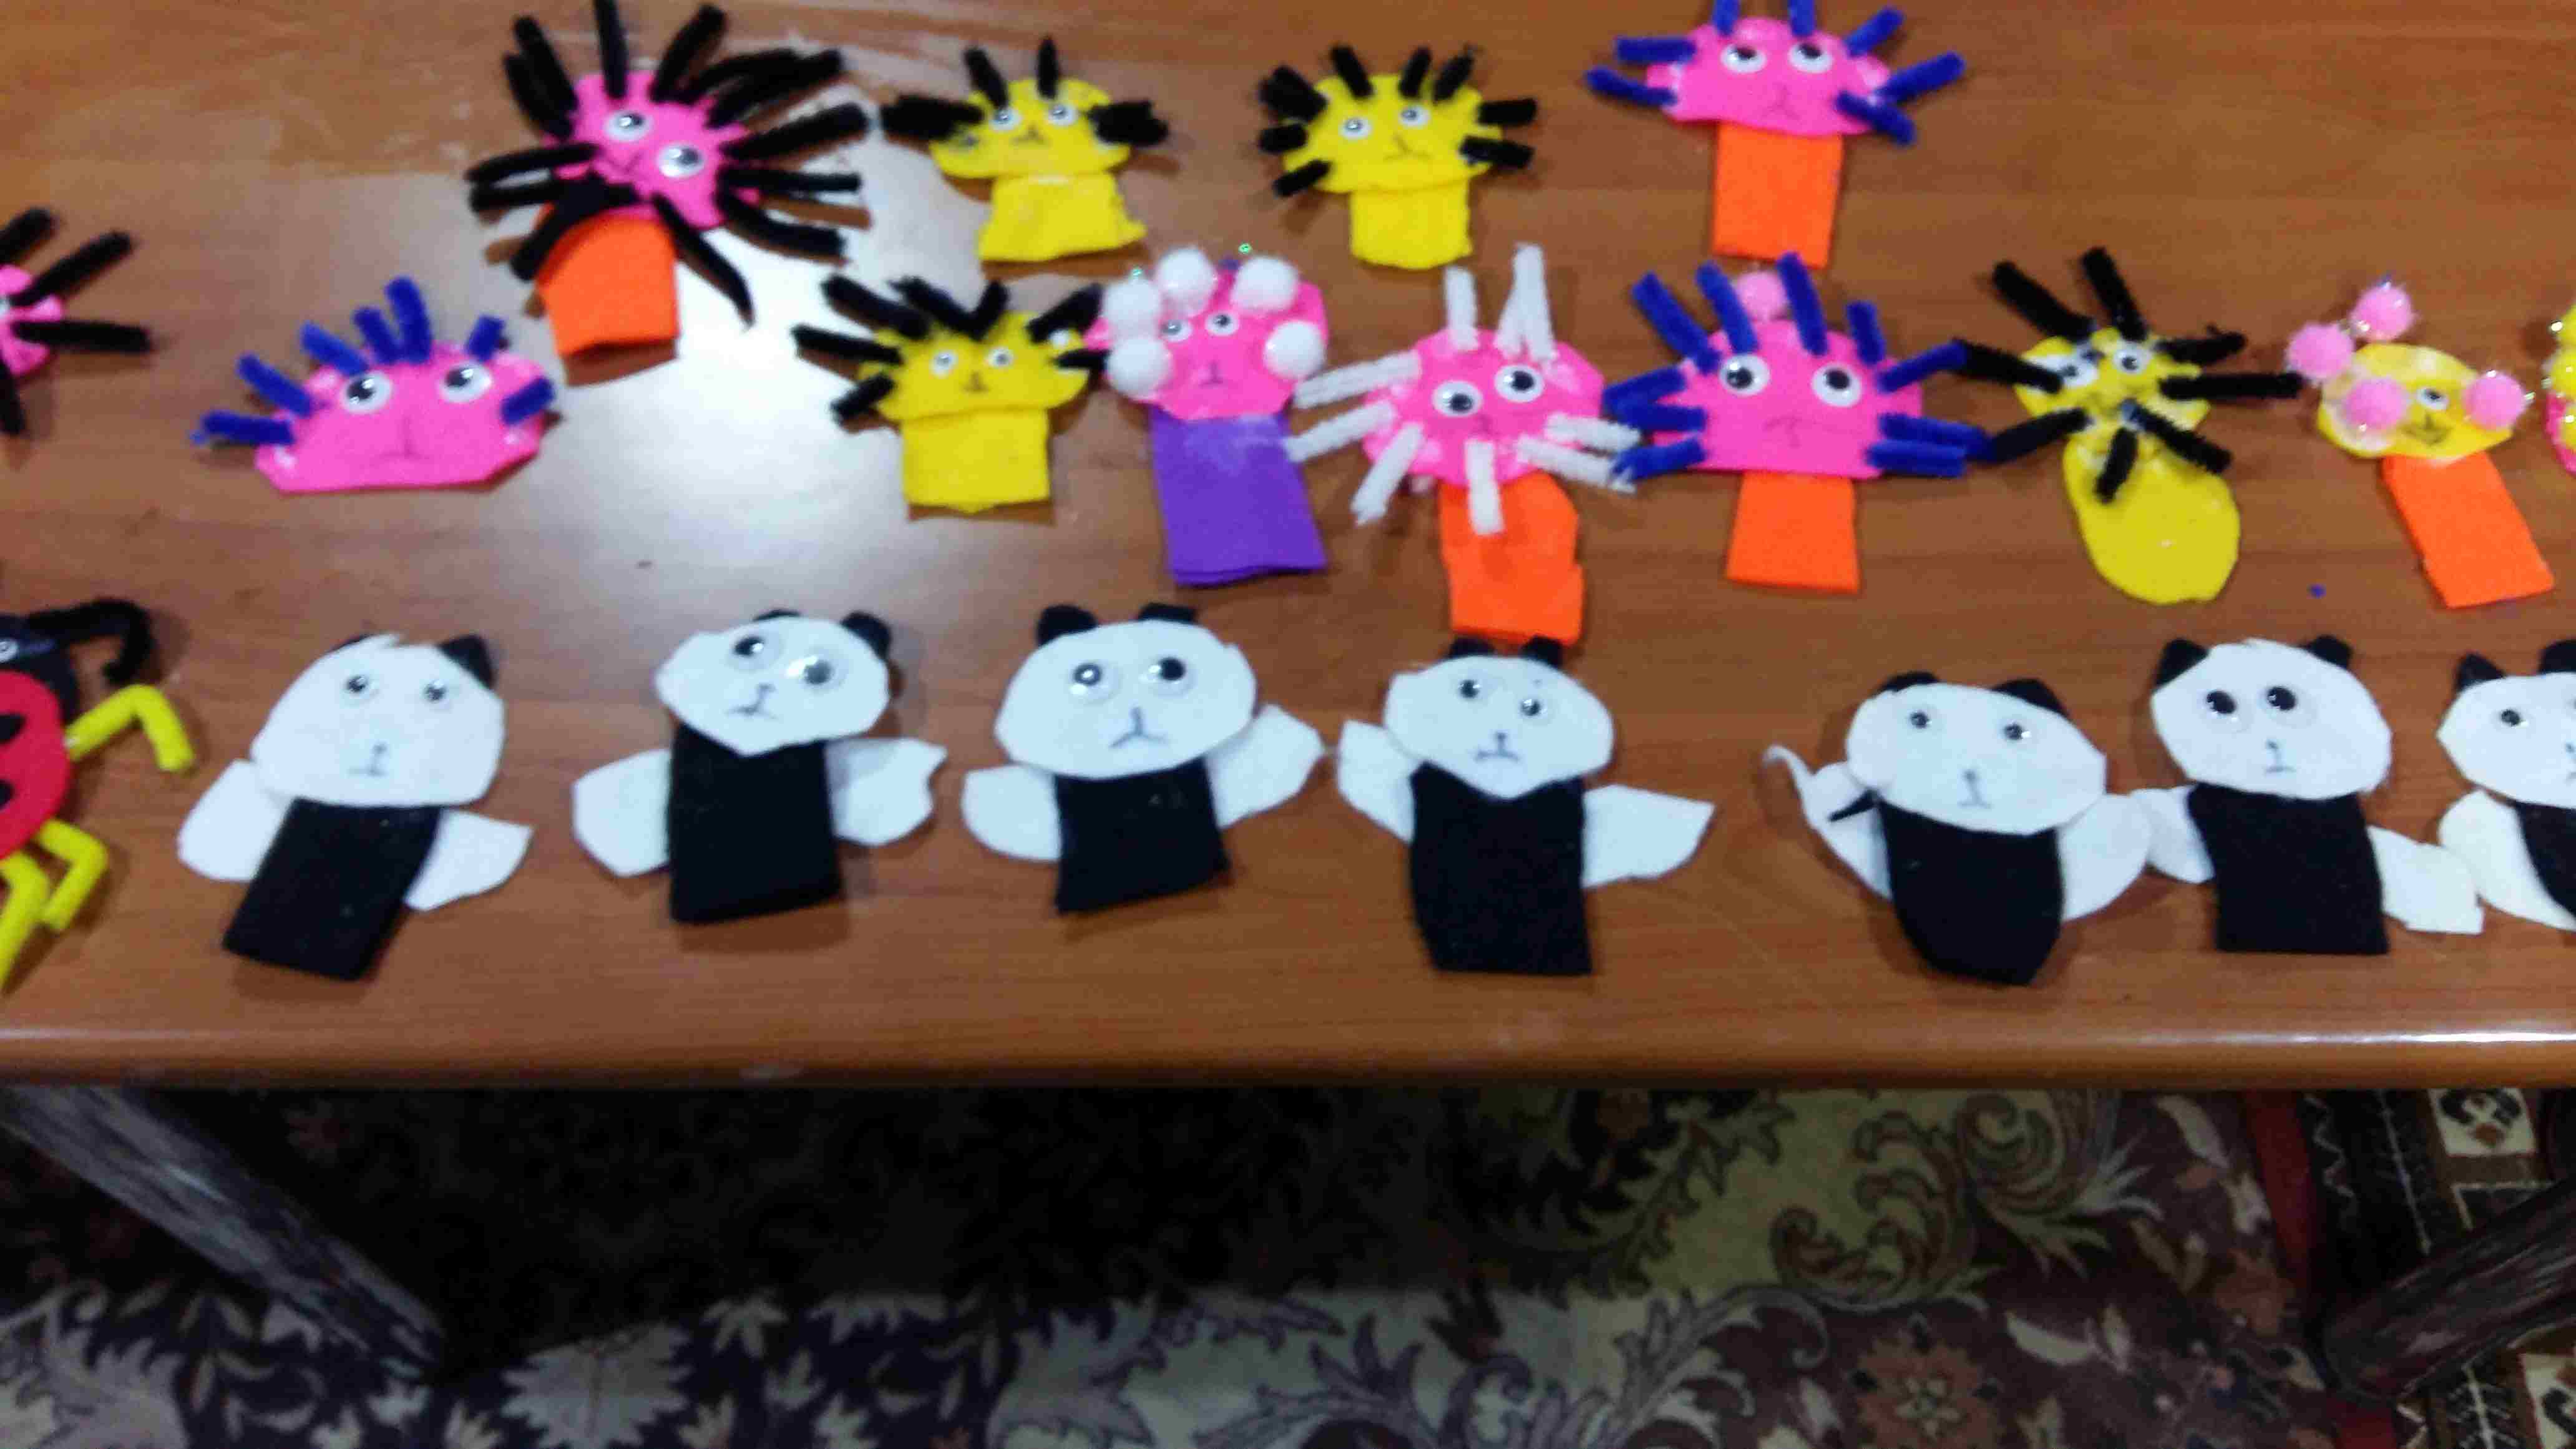 The finished Finger puppets